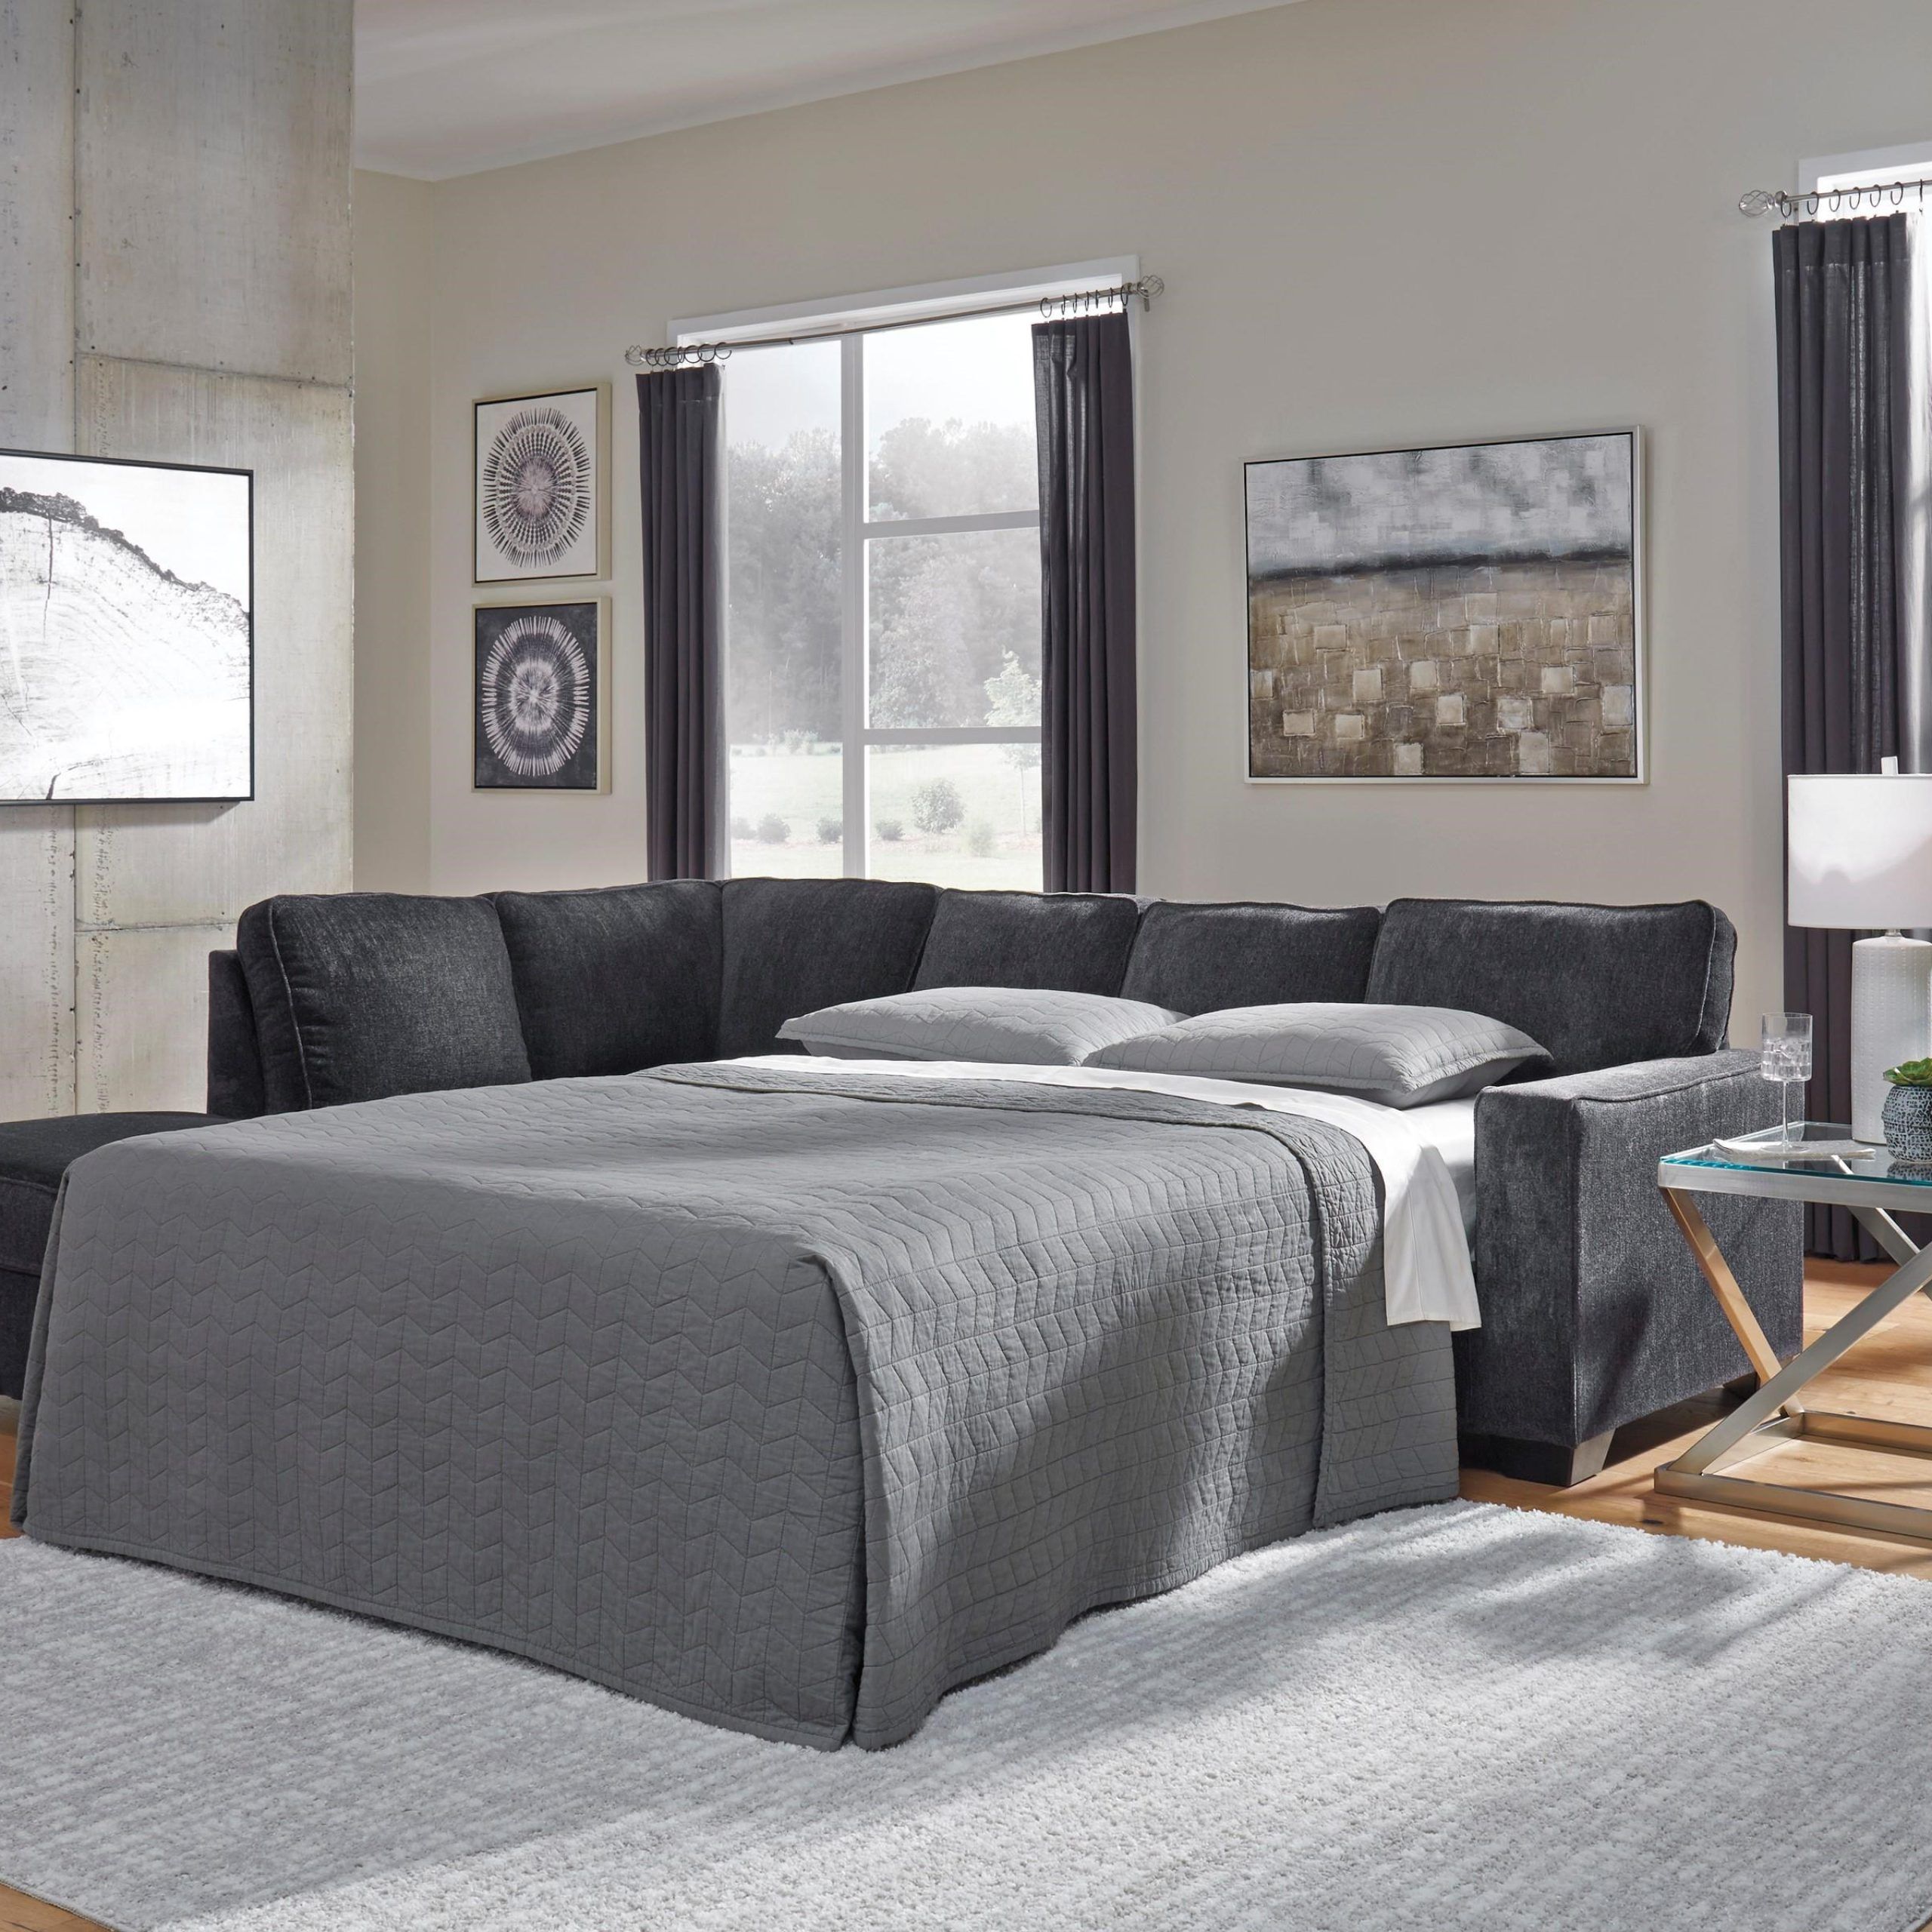 Signature Designashley Altari 805372163 2 Piece Left Arm Facing For Left Or Right Facing Sleeper Sectionals (View 4 of 20)